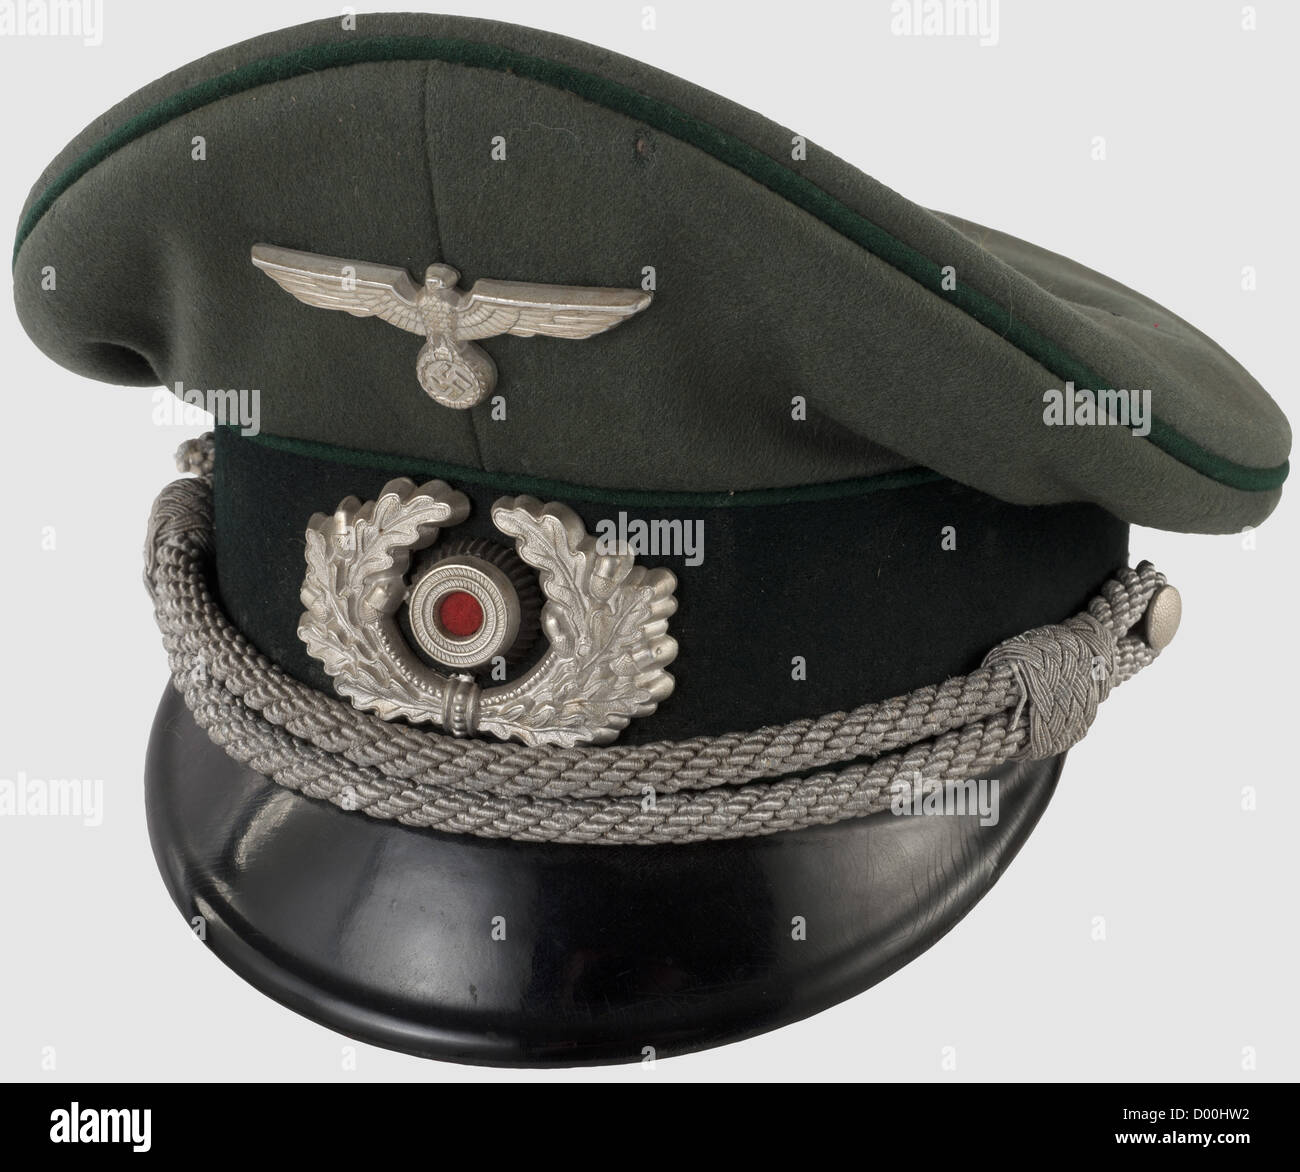 A visor cap for officers,of fine field-grey wool with dark green lace band and dark green piping,aluminium insignia and silver cap cording(damaged). Black silk liner,grey leather sweat band,maker's label 'Meister-Klasse CW' with gold stamping and wearer's tag 'Oberzahlmeister Willy Lehner Nr. 08797A.' Defects and moth traces,historic,historical,1930s,1930s,20th century,army,armies,armed forces,military,militaria,object,objects,stills,clipping,clippings,cut out,cut-out,cut-outs,uniform,uniforms,clothes,piece of clothing,headpiece,hea,Additional-Rights-Clearences-Not Available Stock Photo